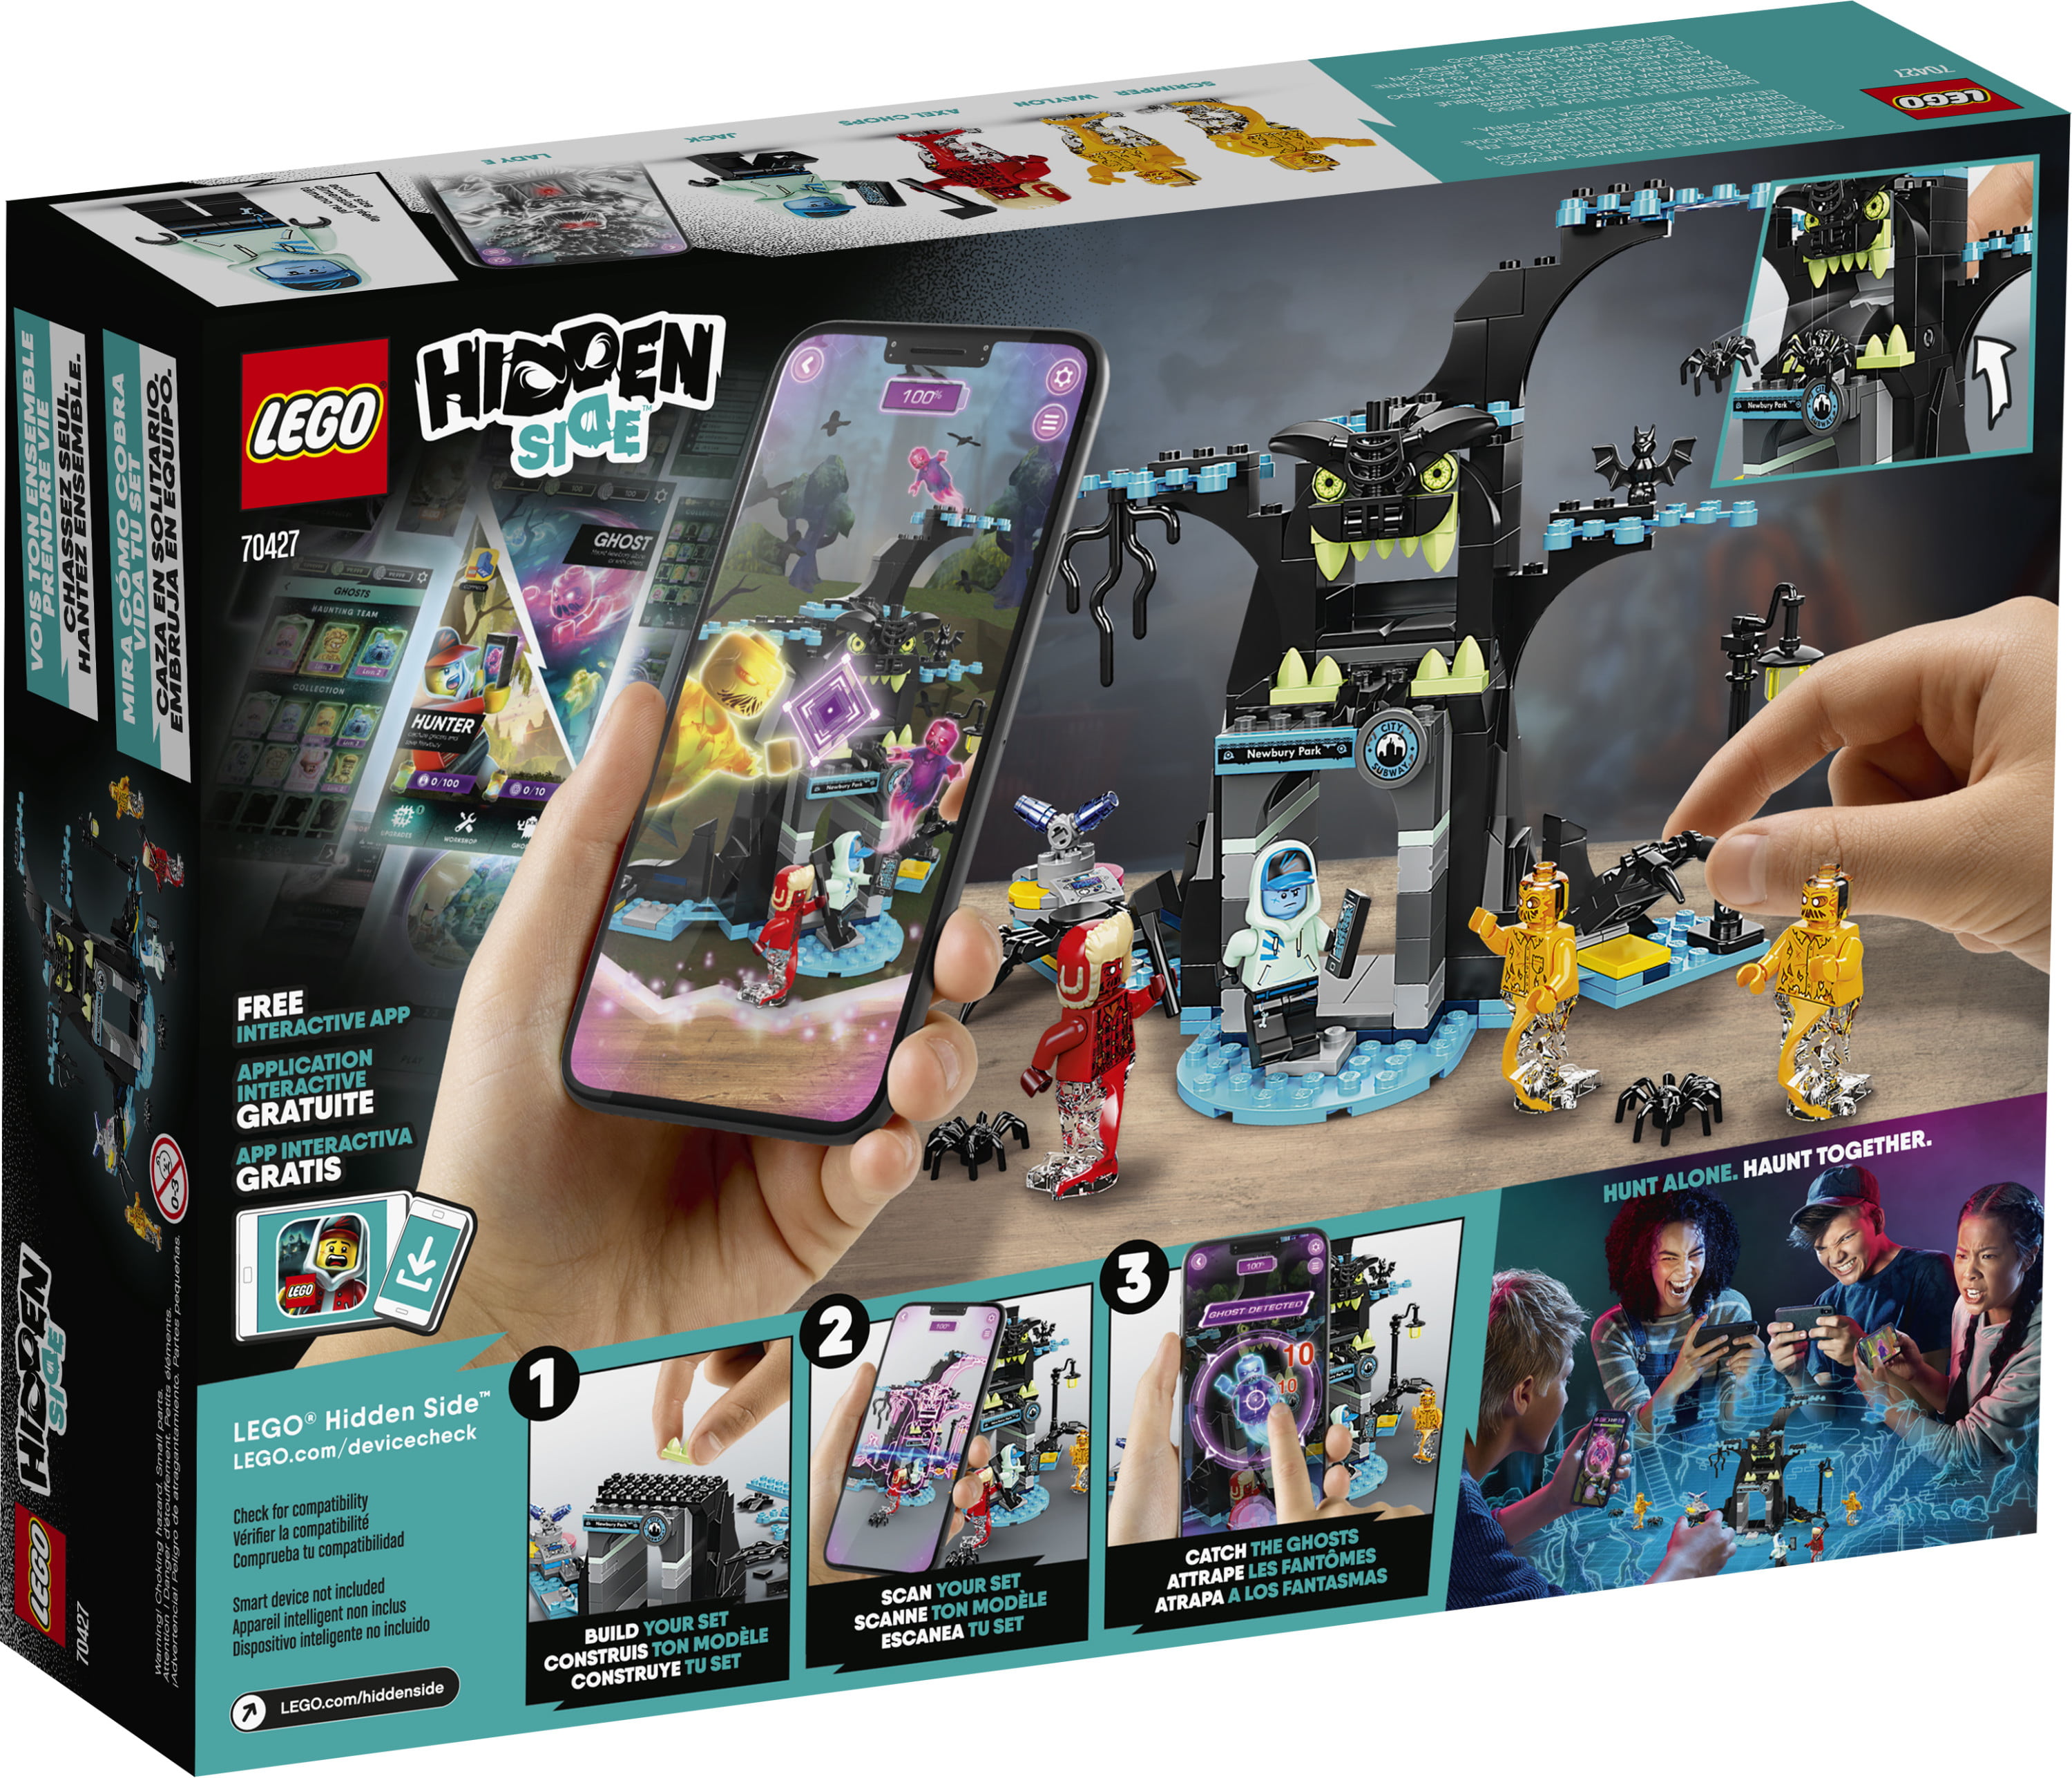 LEGO Hidden Side Welcome to The Hidden Side 70427 Augmented (AR) Play Experience for Kids Pieces) - Walmart.com